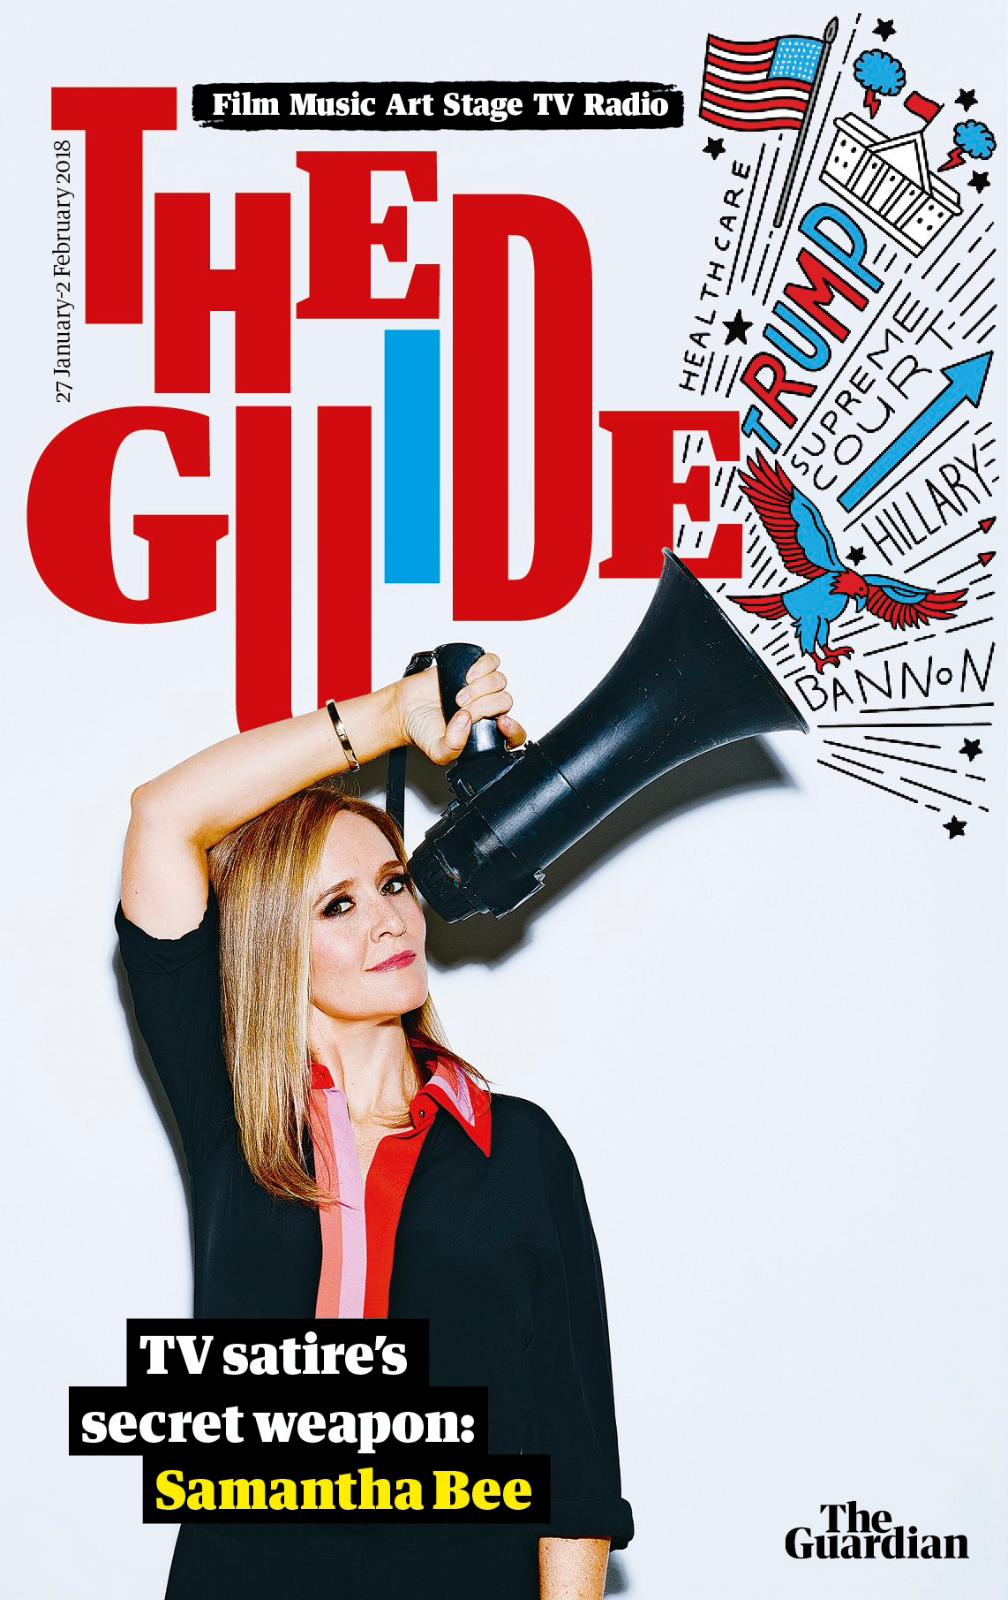 Uk Guide Magazine January 2018 Samantha Bee Cover Story Interview Yourcelebritymagazines 1443